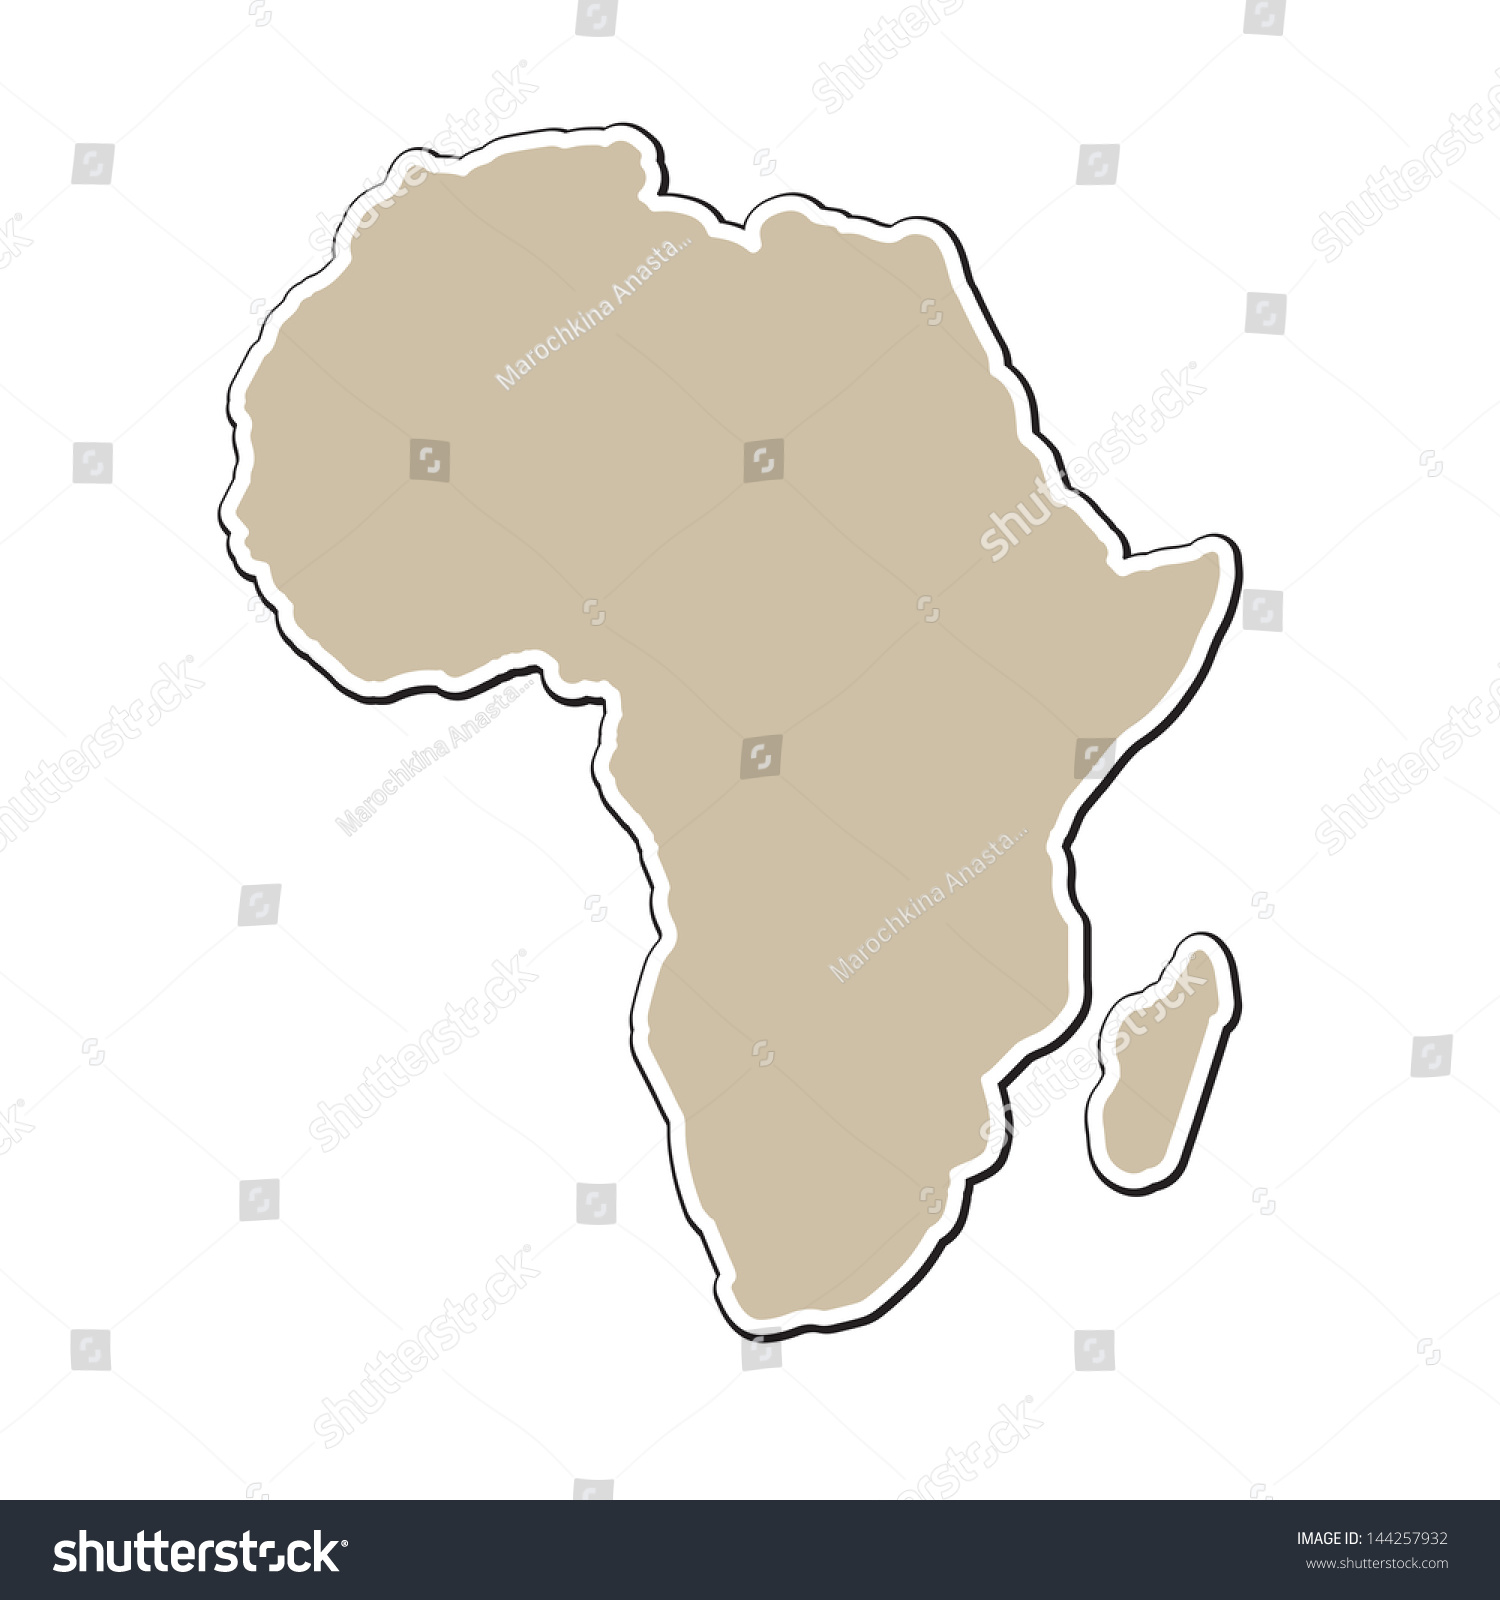 Contour Maps Of Africa Silhouette On Paper Style Royalty Free Stock Vector 144257932 3949